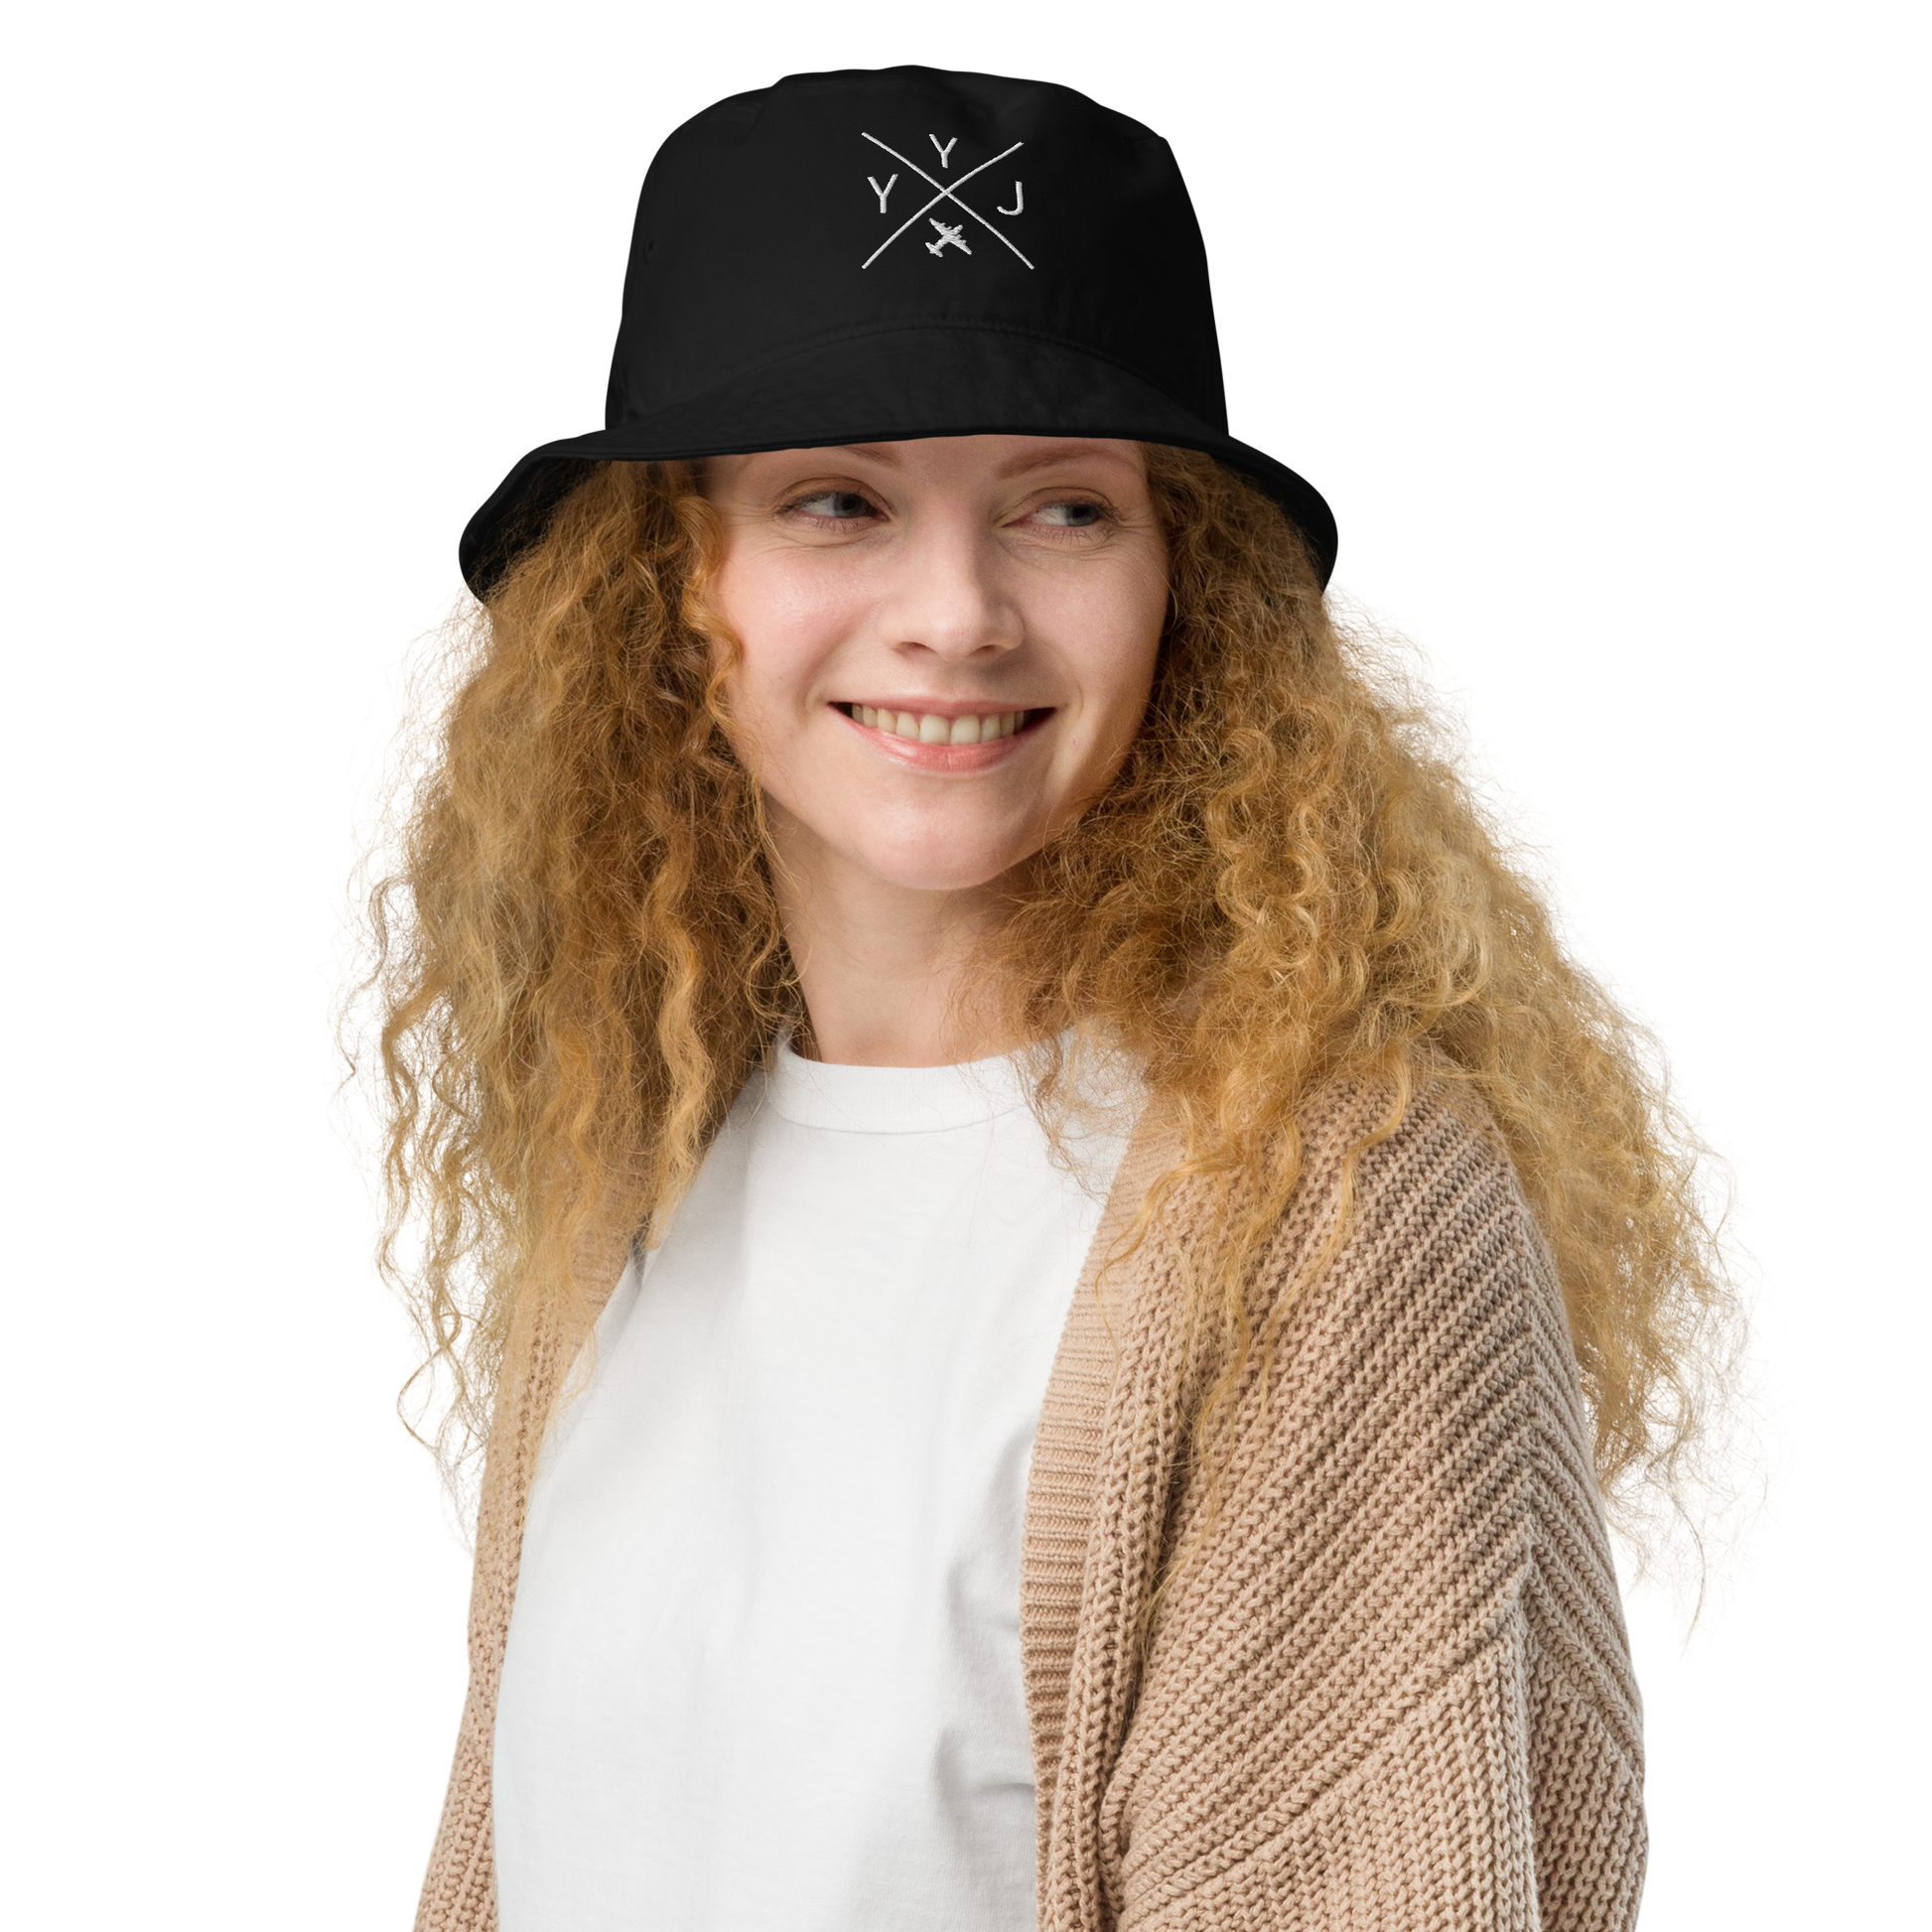 YHM Designs - YYJ Victoria Organic Cotton Bucket Hat - Crossed-X Design with Airport Code and Vintage Propliner - White Embroidery - Image 04